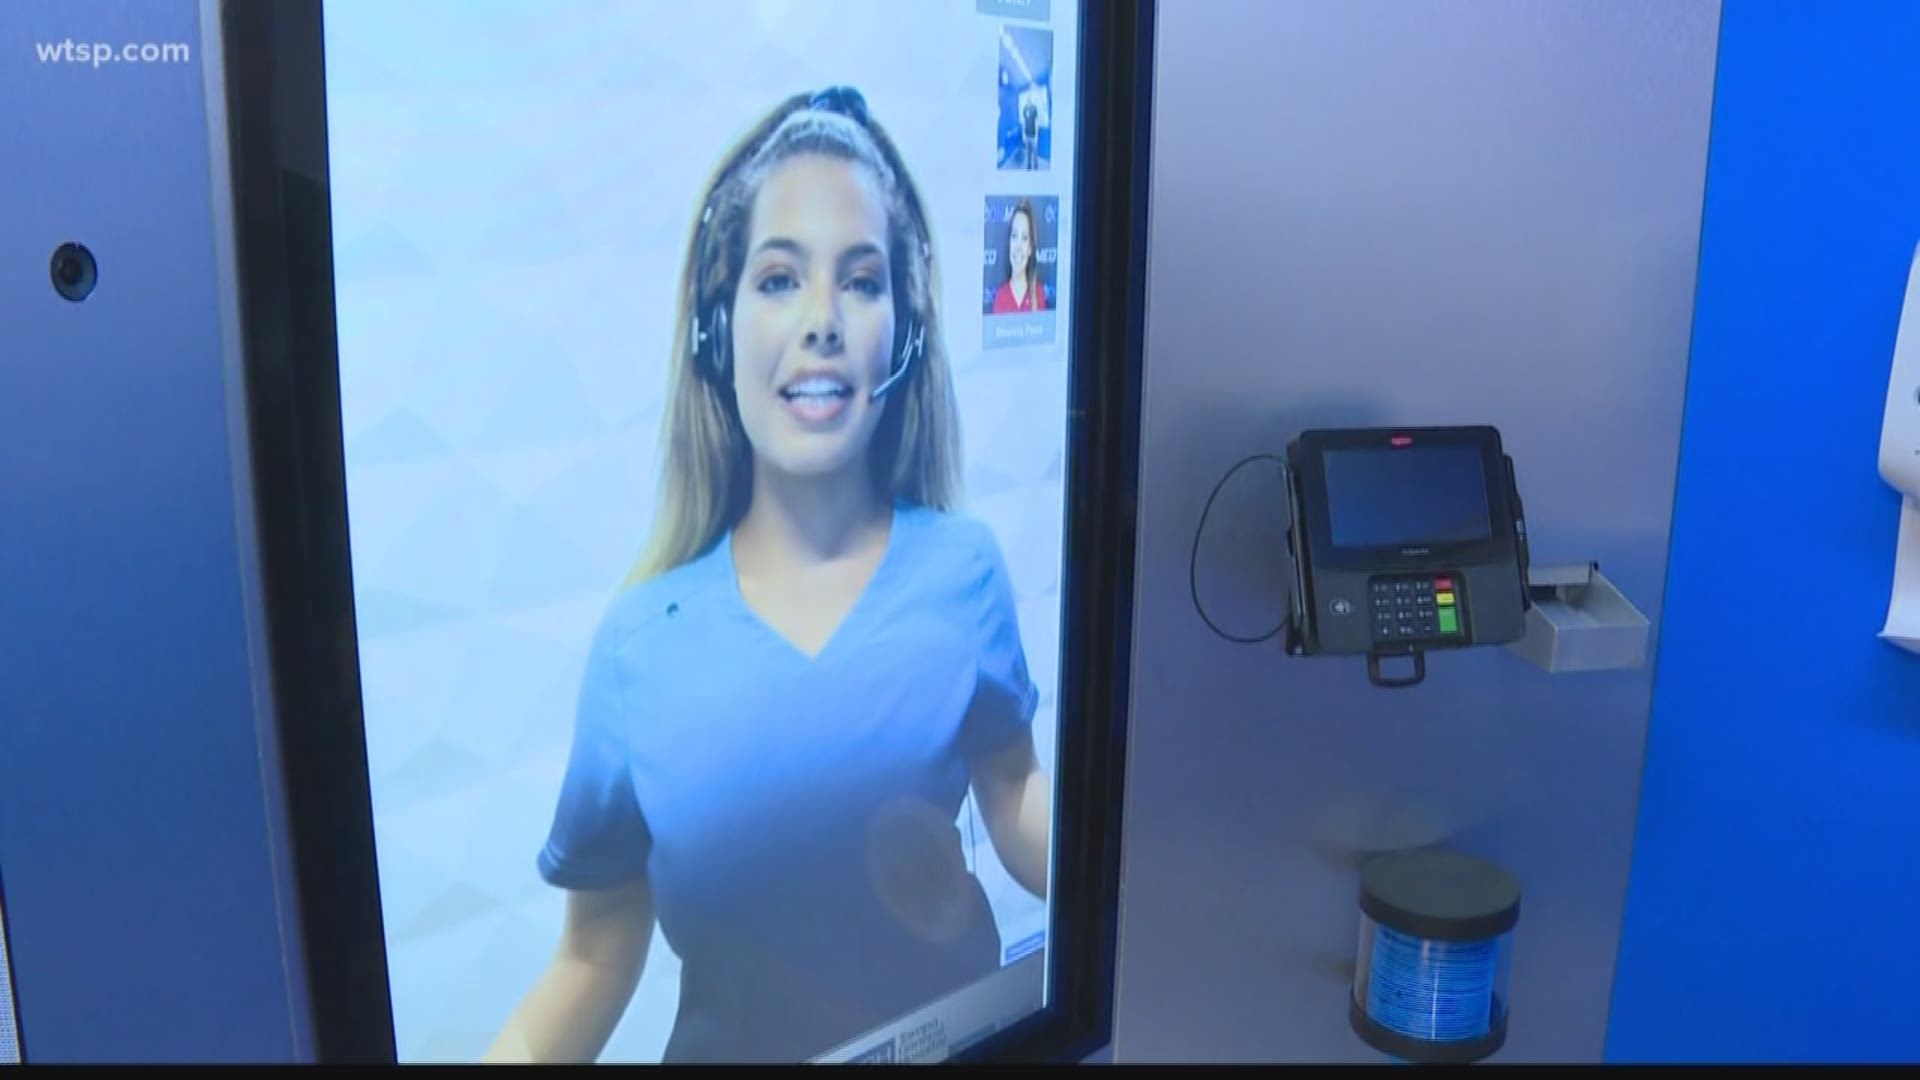 A new telemedicine station has opened at Tampa General. https://bit.ly/2qhbaHy